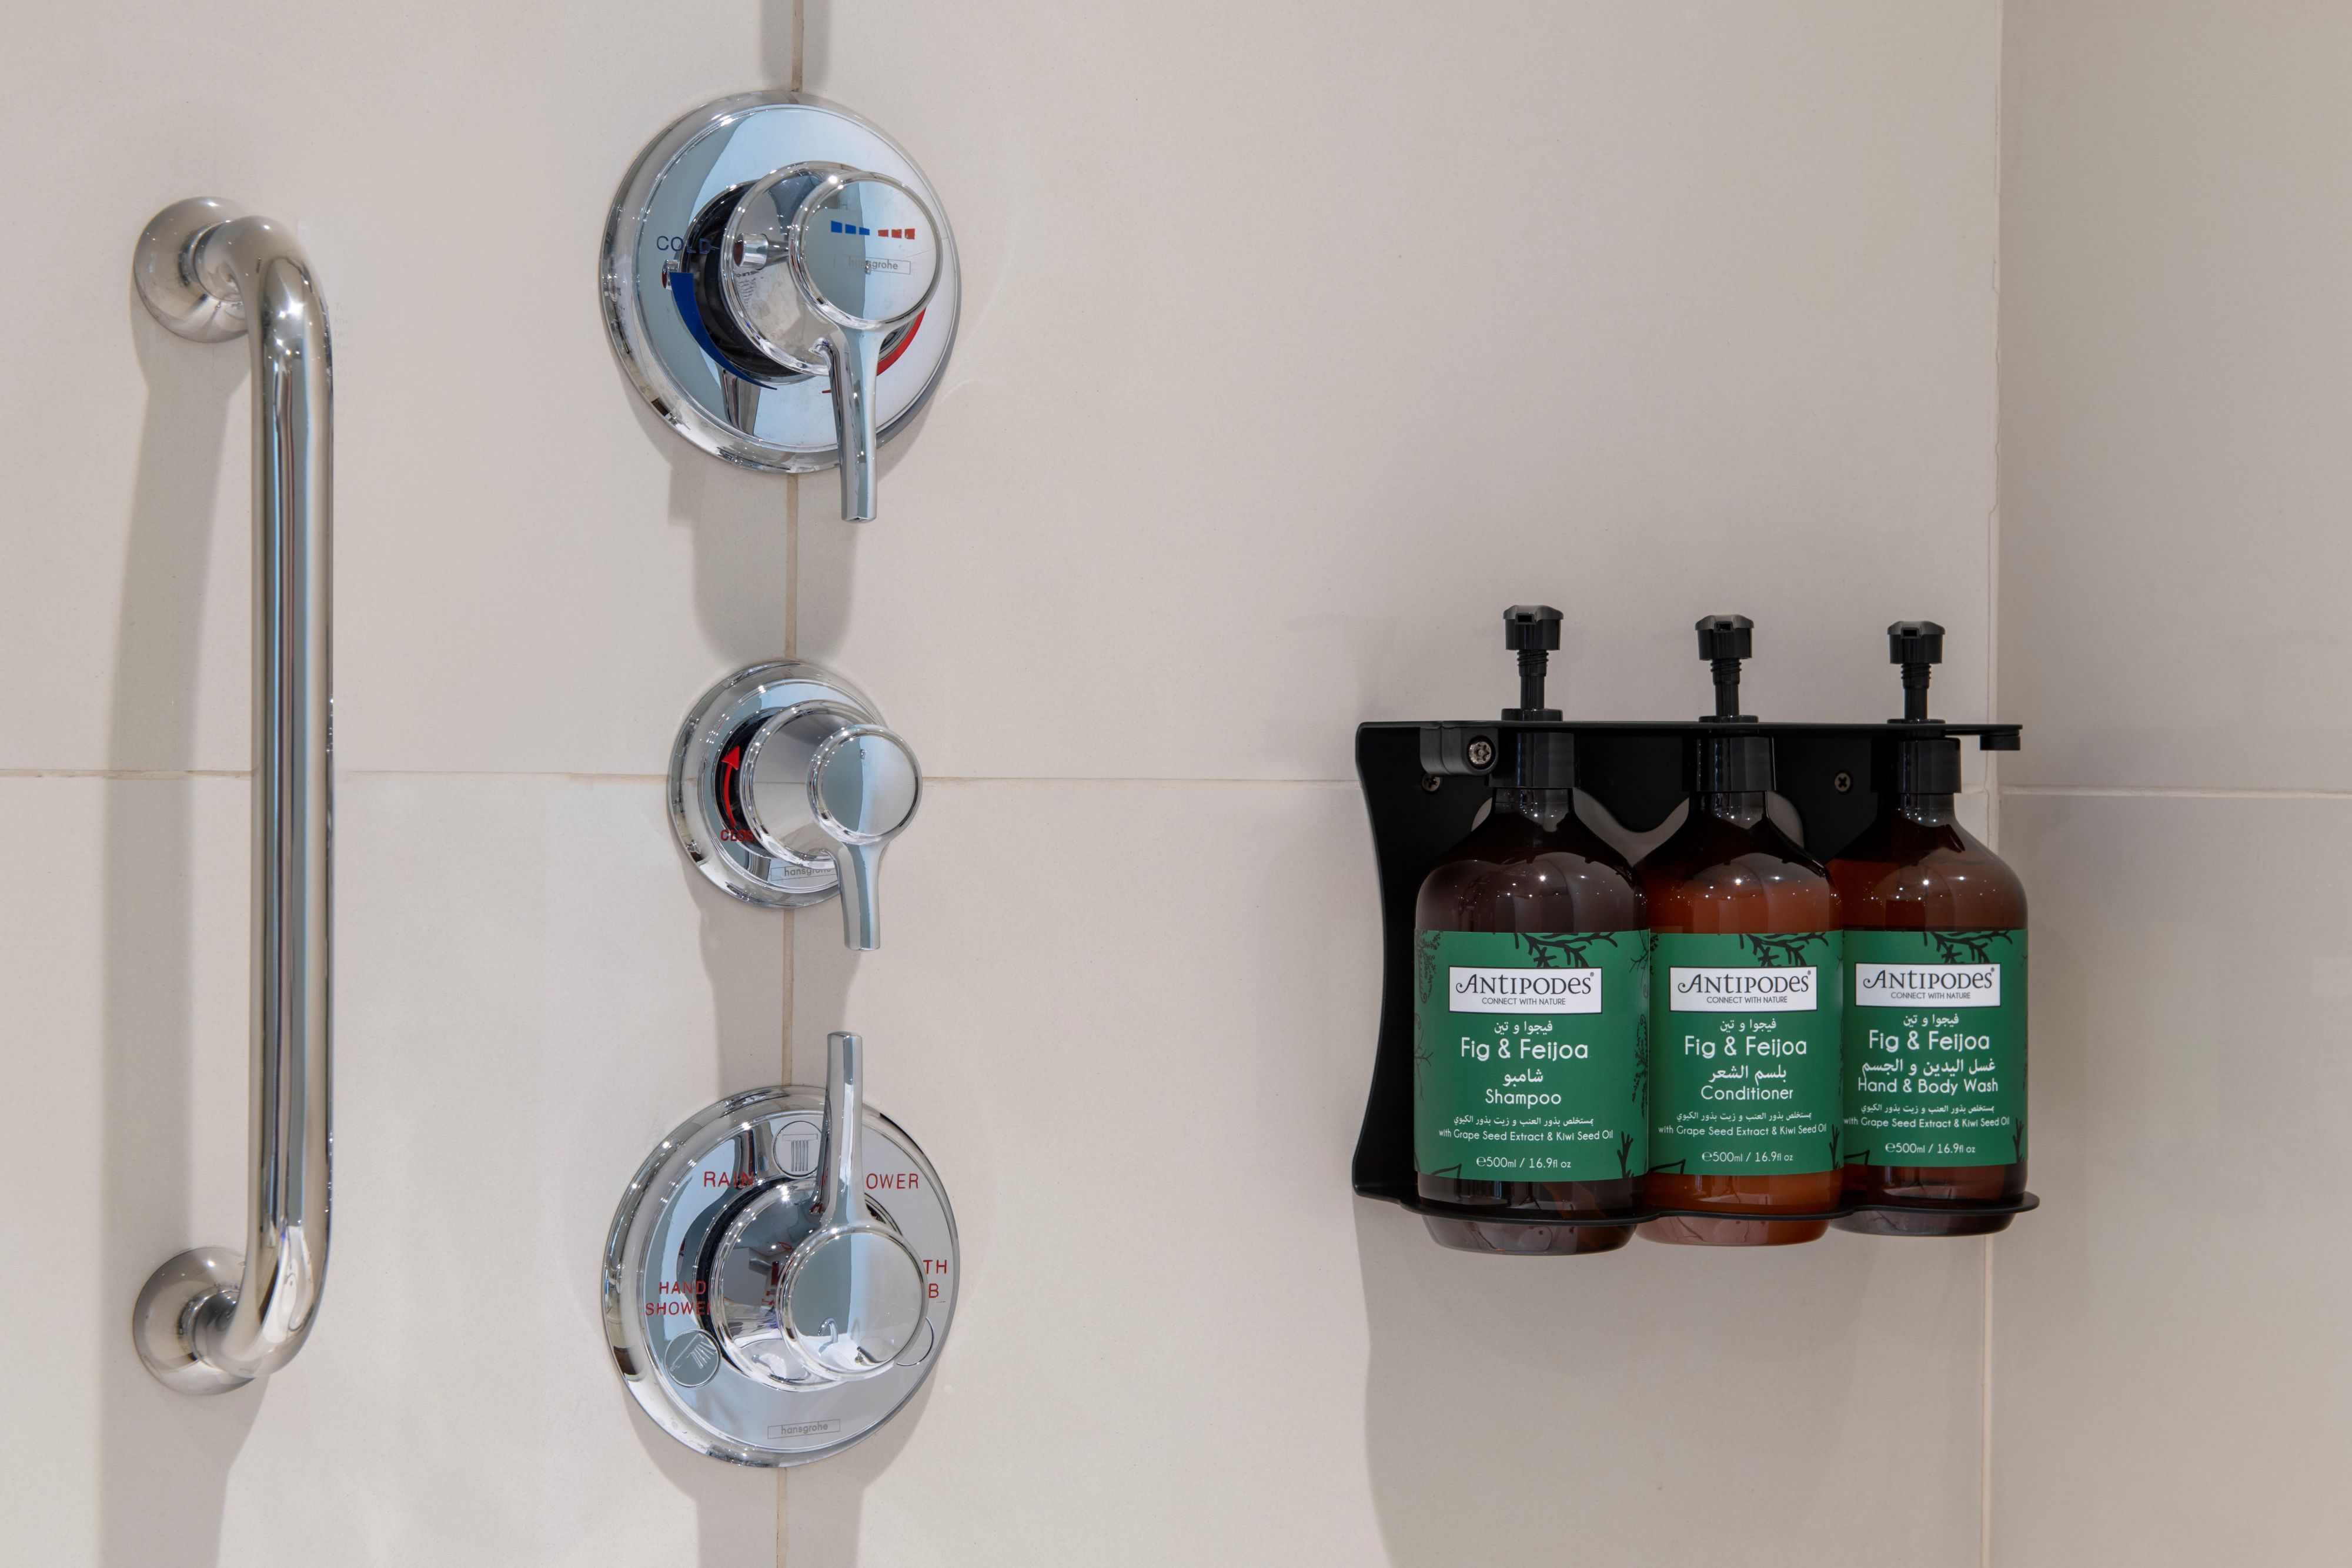 Bathroom amenities with a new wellness hotel collection-anti podes